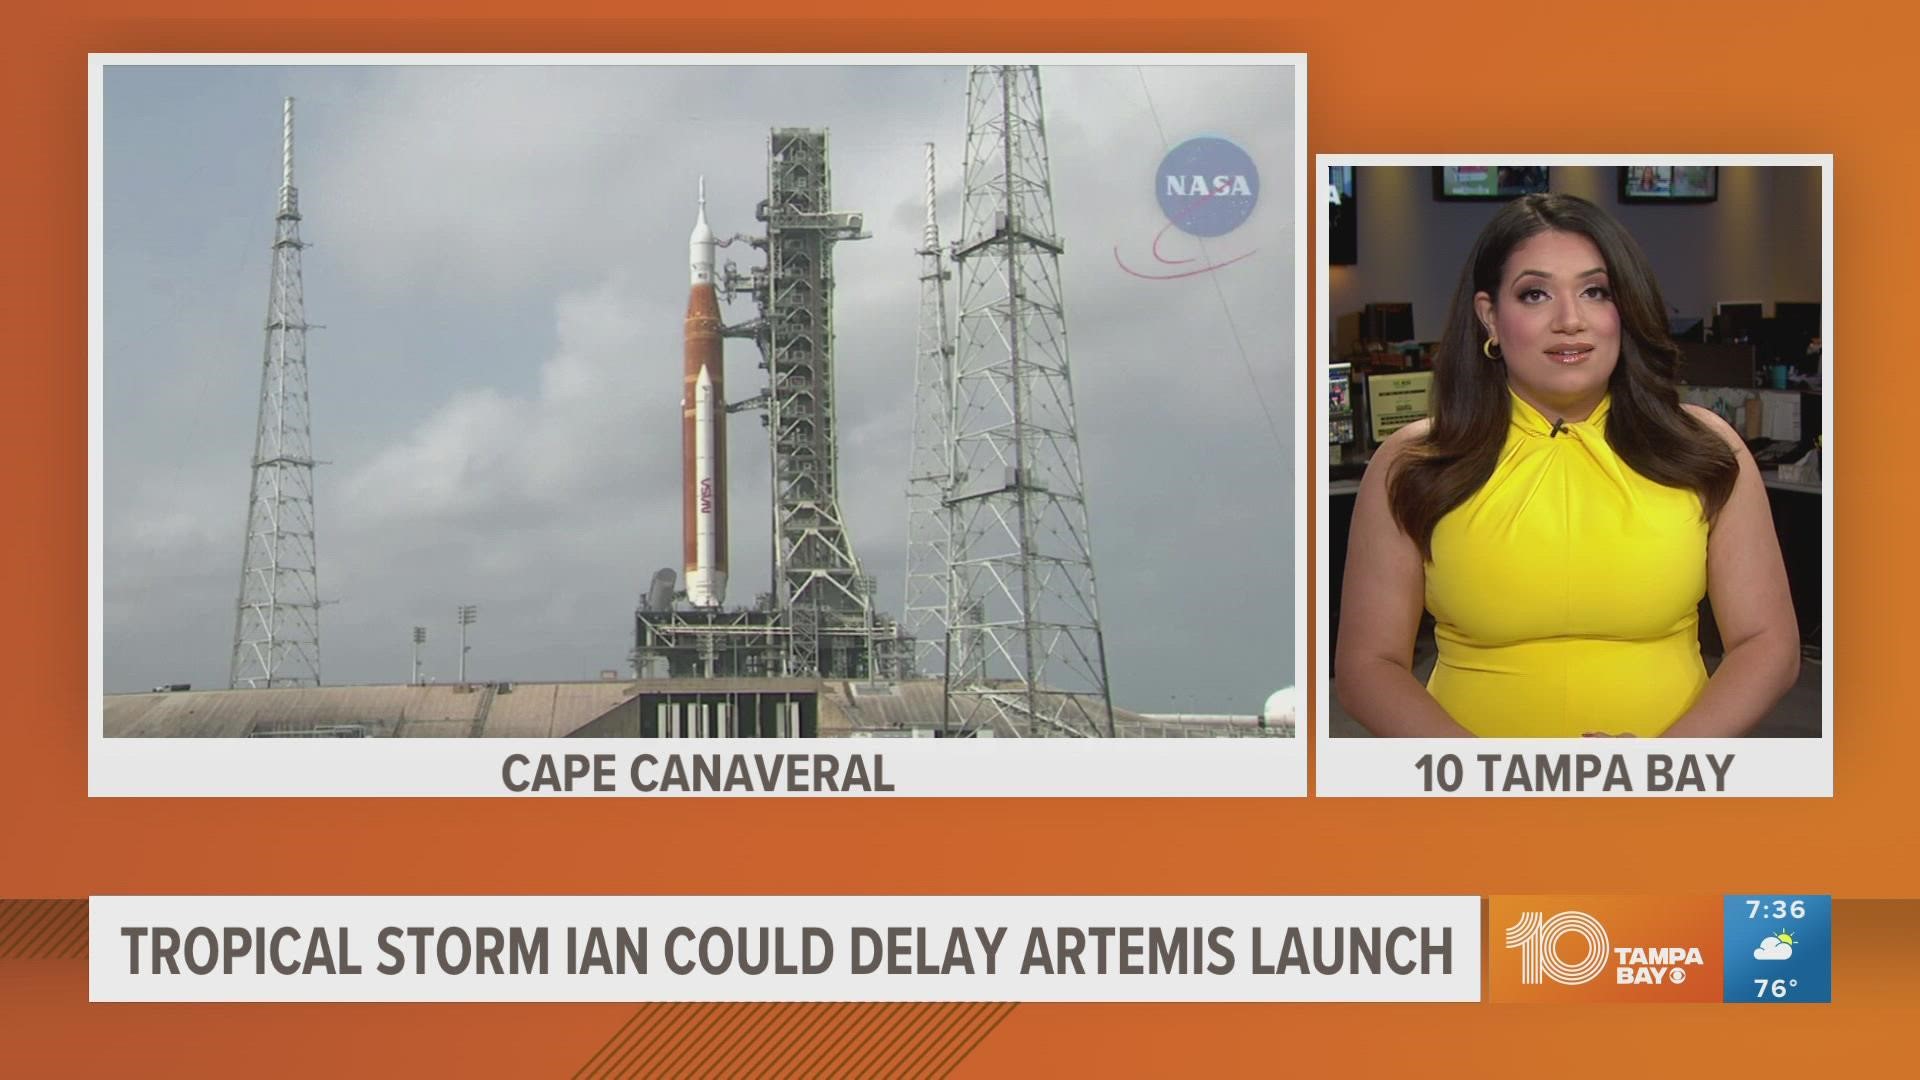 NASA said it will monitor the forecast and decide no later than Saturday whether to delay the launch.